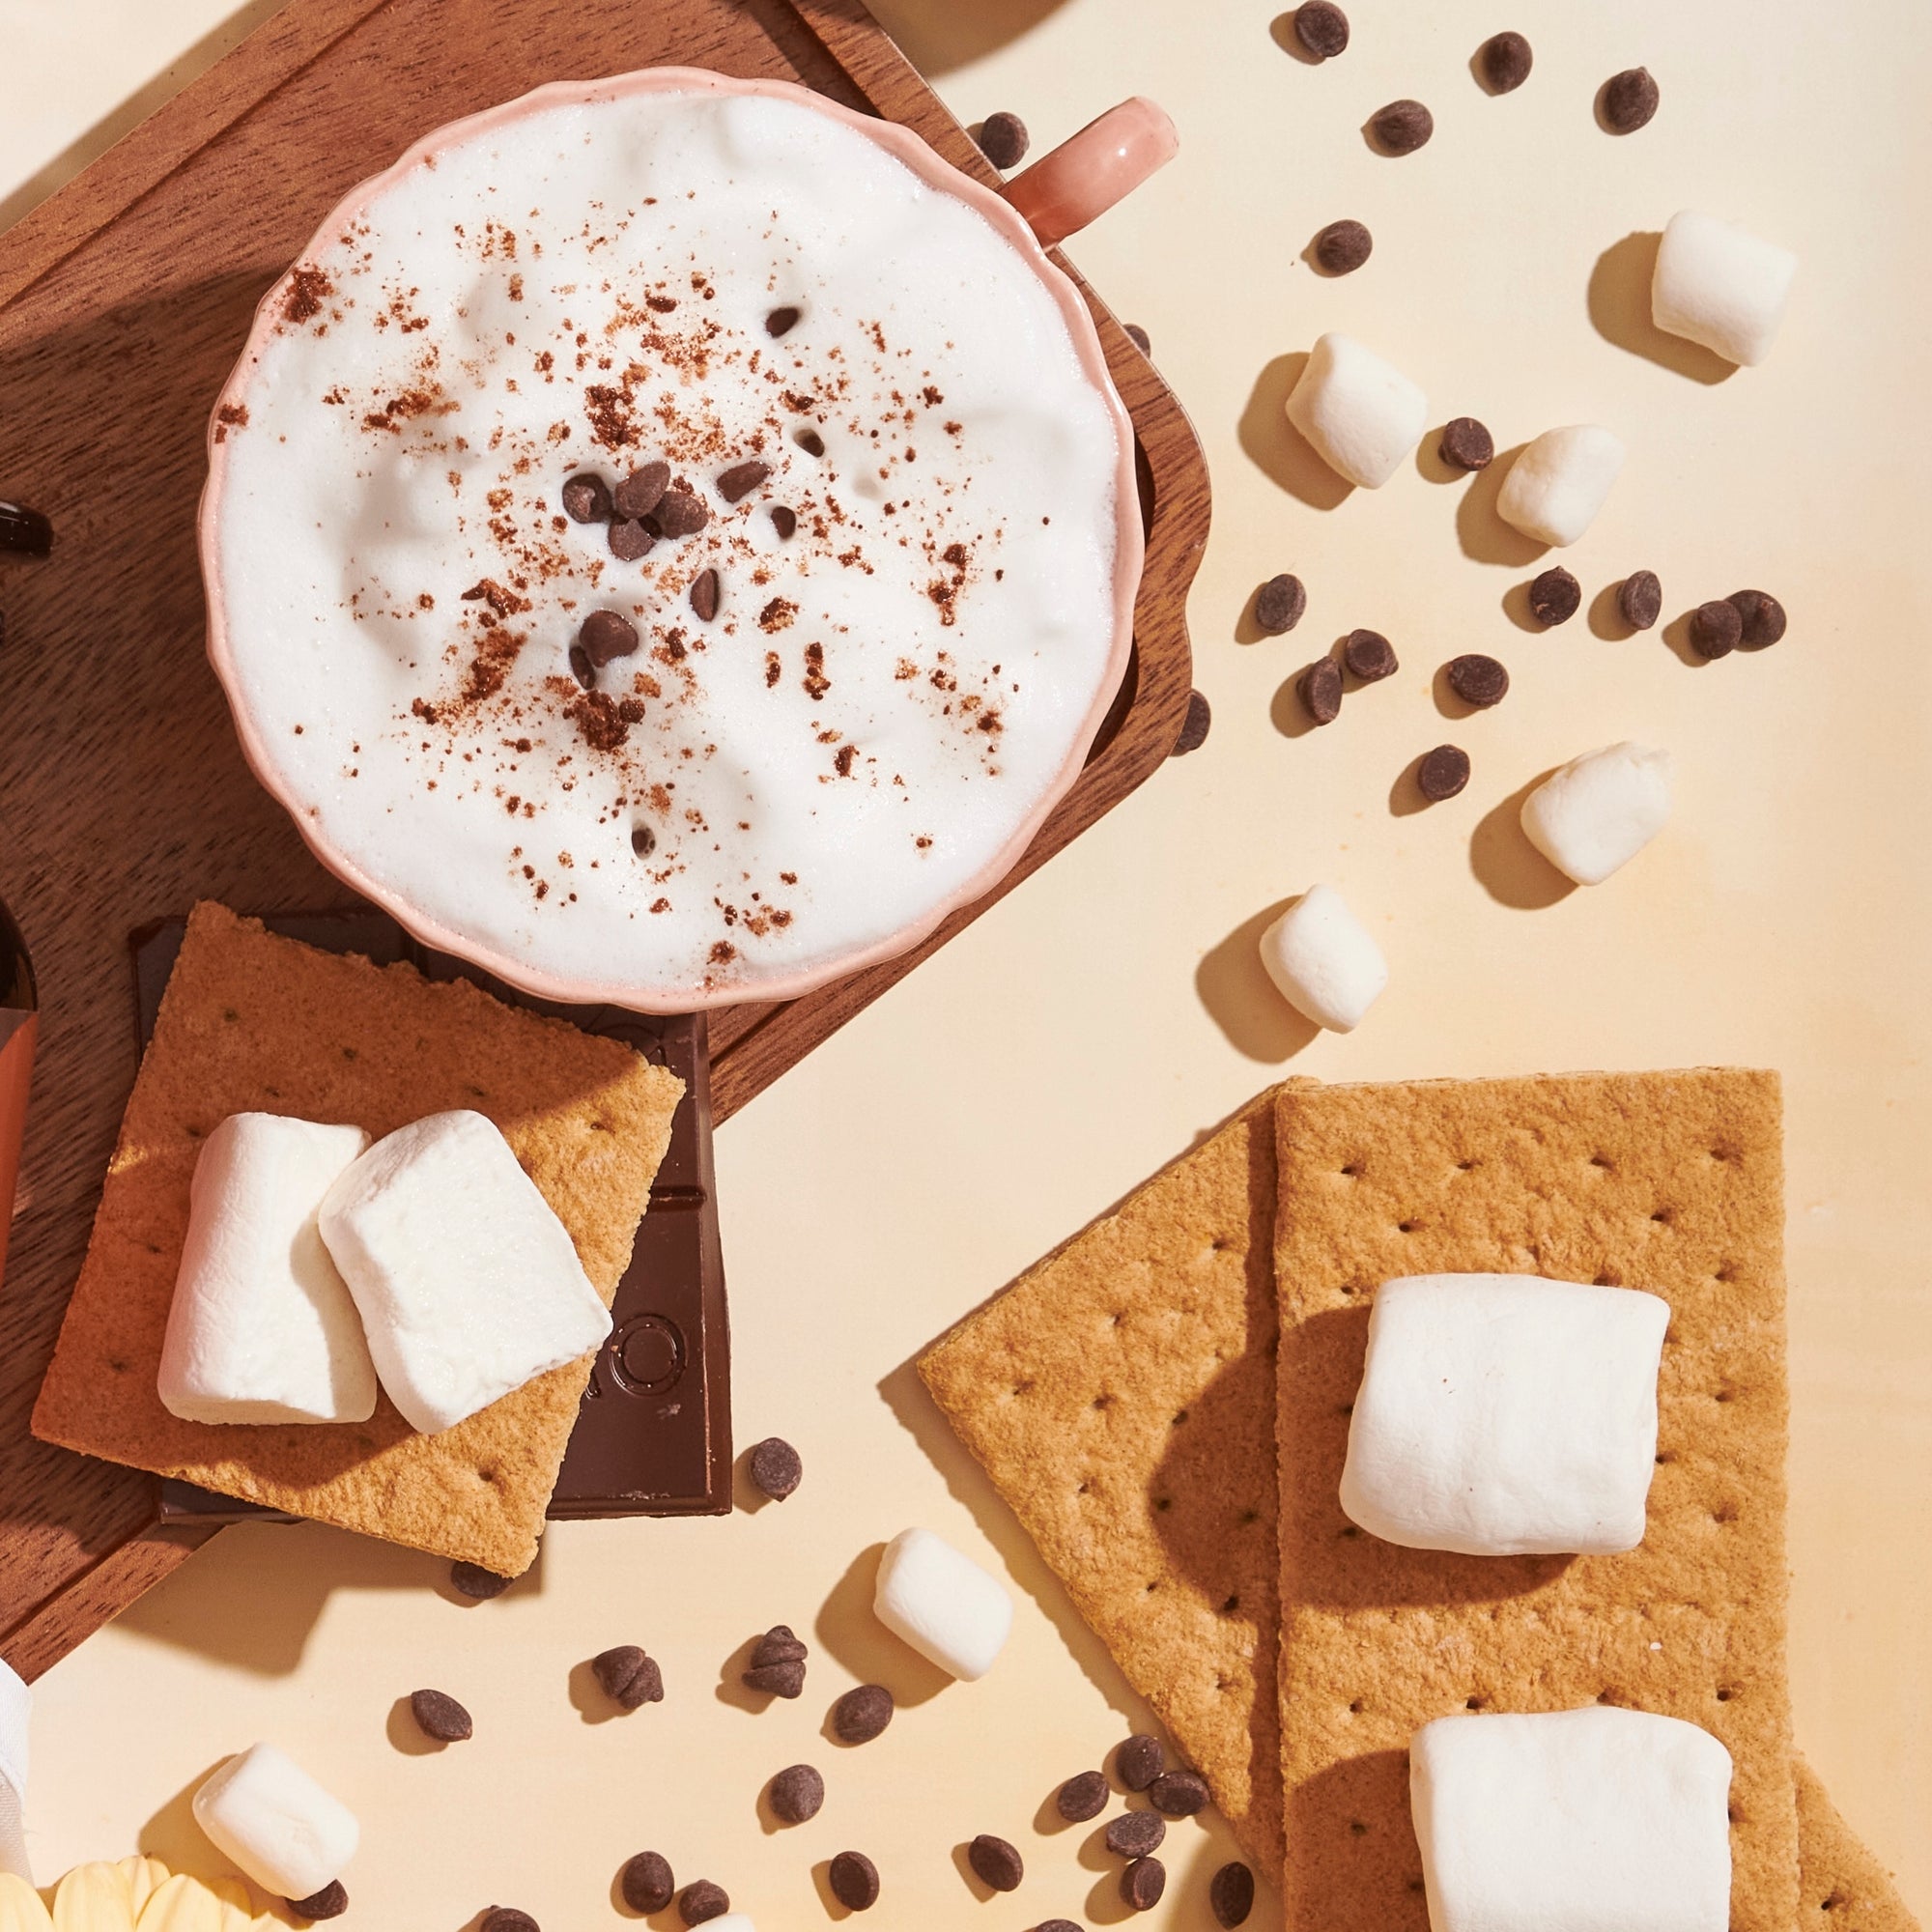 a S&#39;mores tea latte with foamed milk, chocolate and cinnamon and chocolate chips sprinkled on the table with graham crackers, chocolate, and marshmallows,